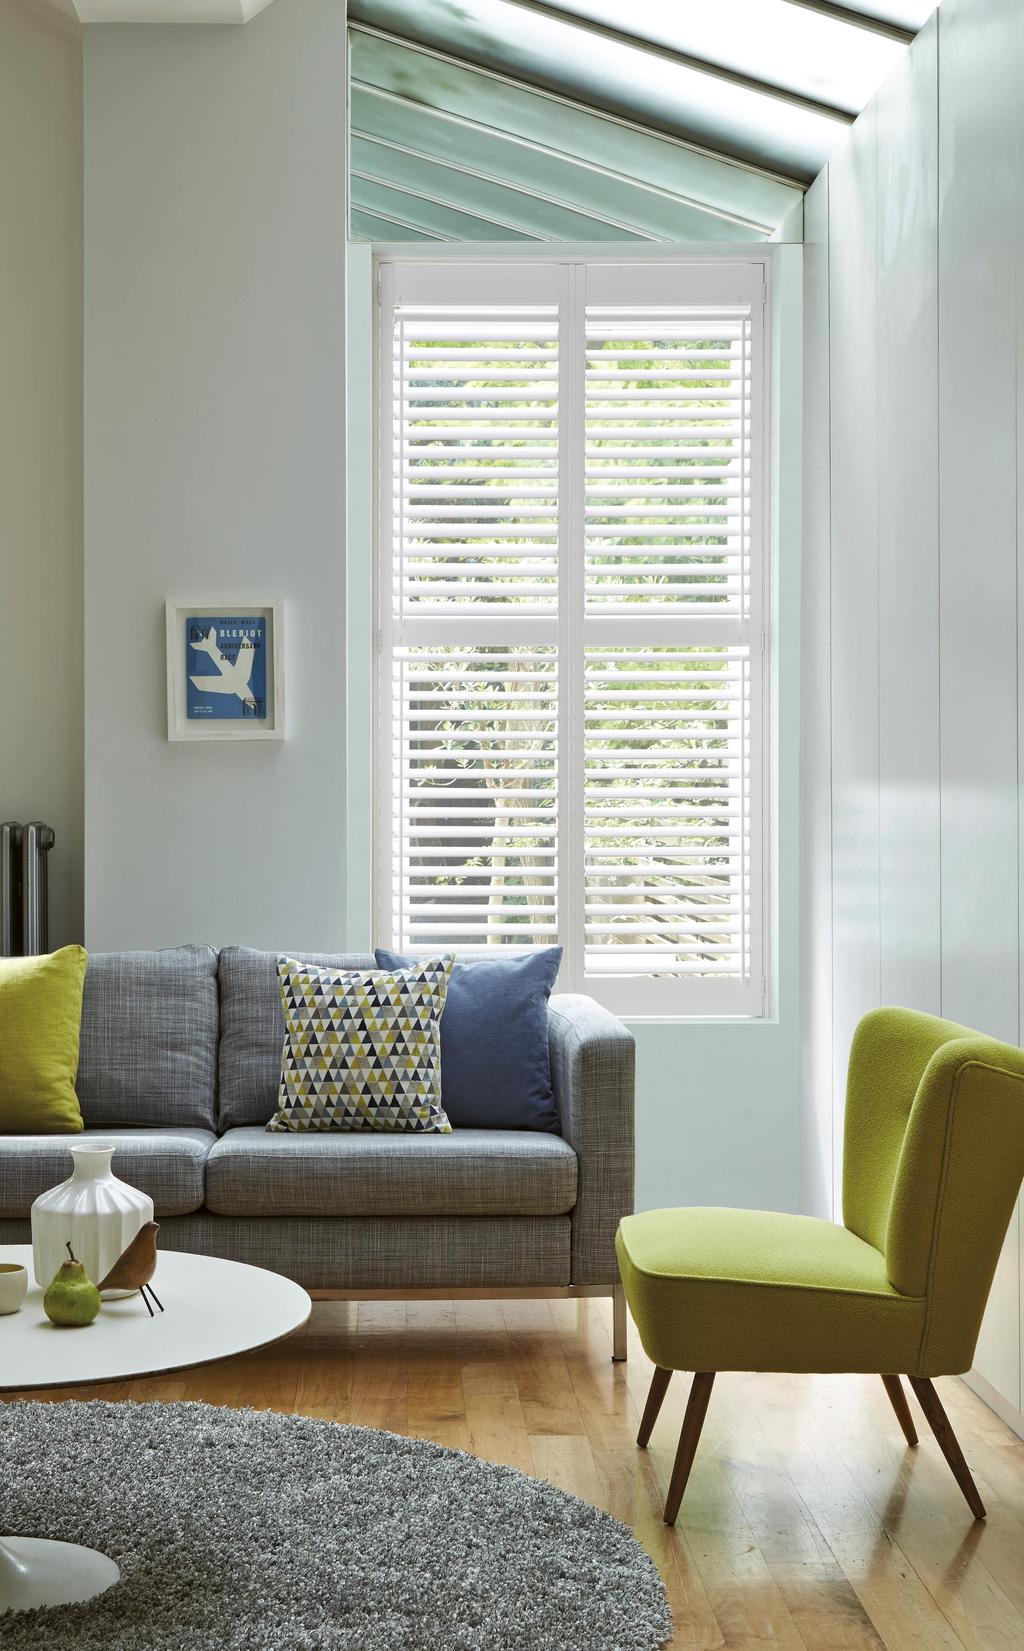 Carter Blinds Ltd Sleek and unfussy, shutters are the ultimate in